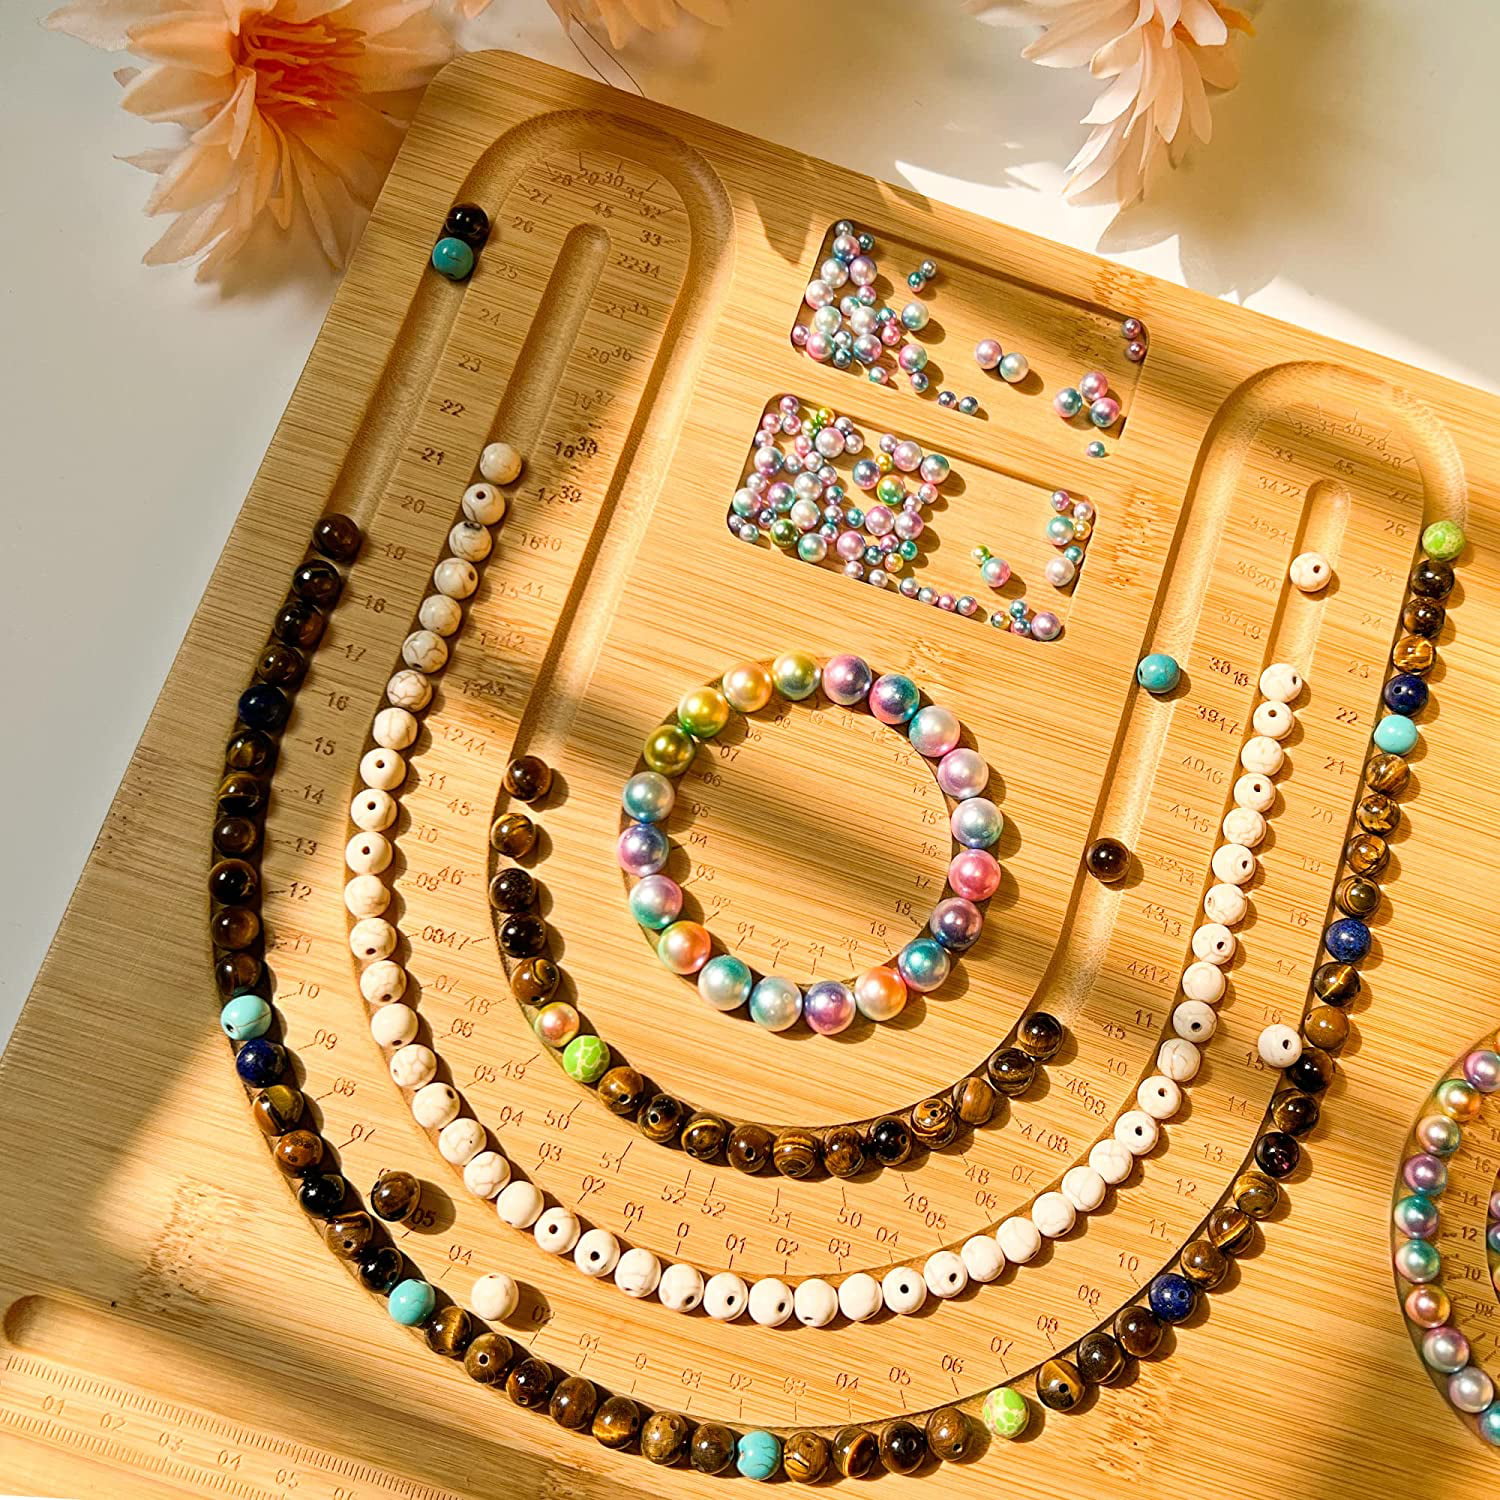 Online Class: How to use a Bead Board to Design Jewelry